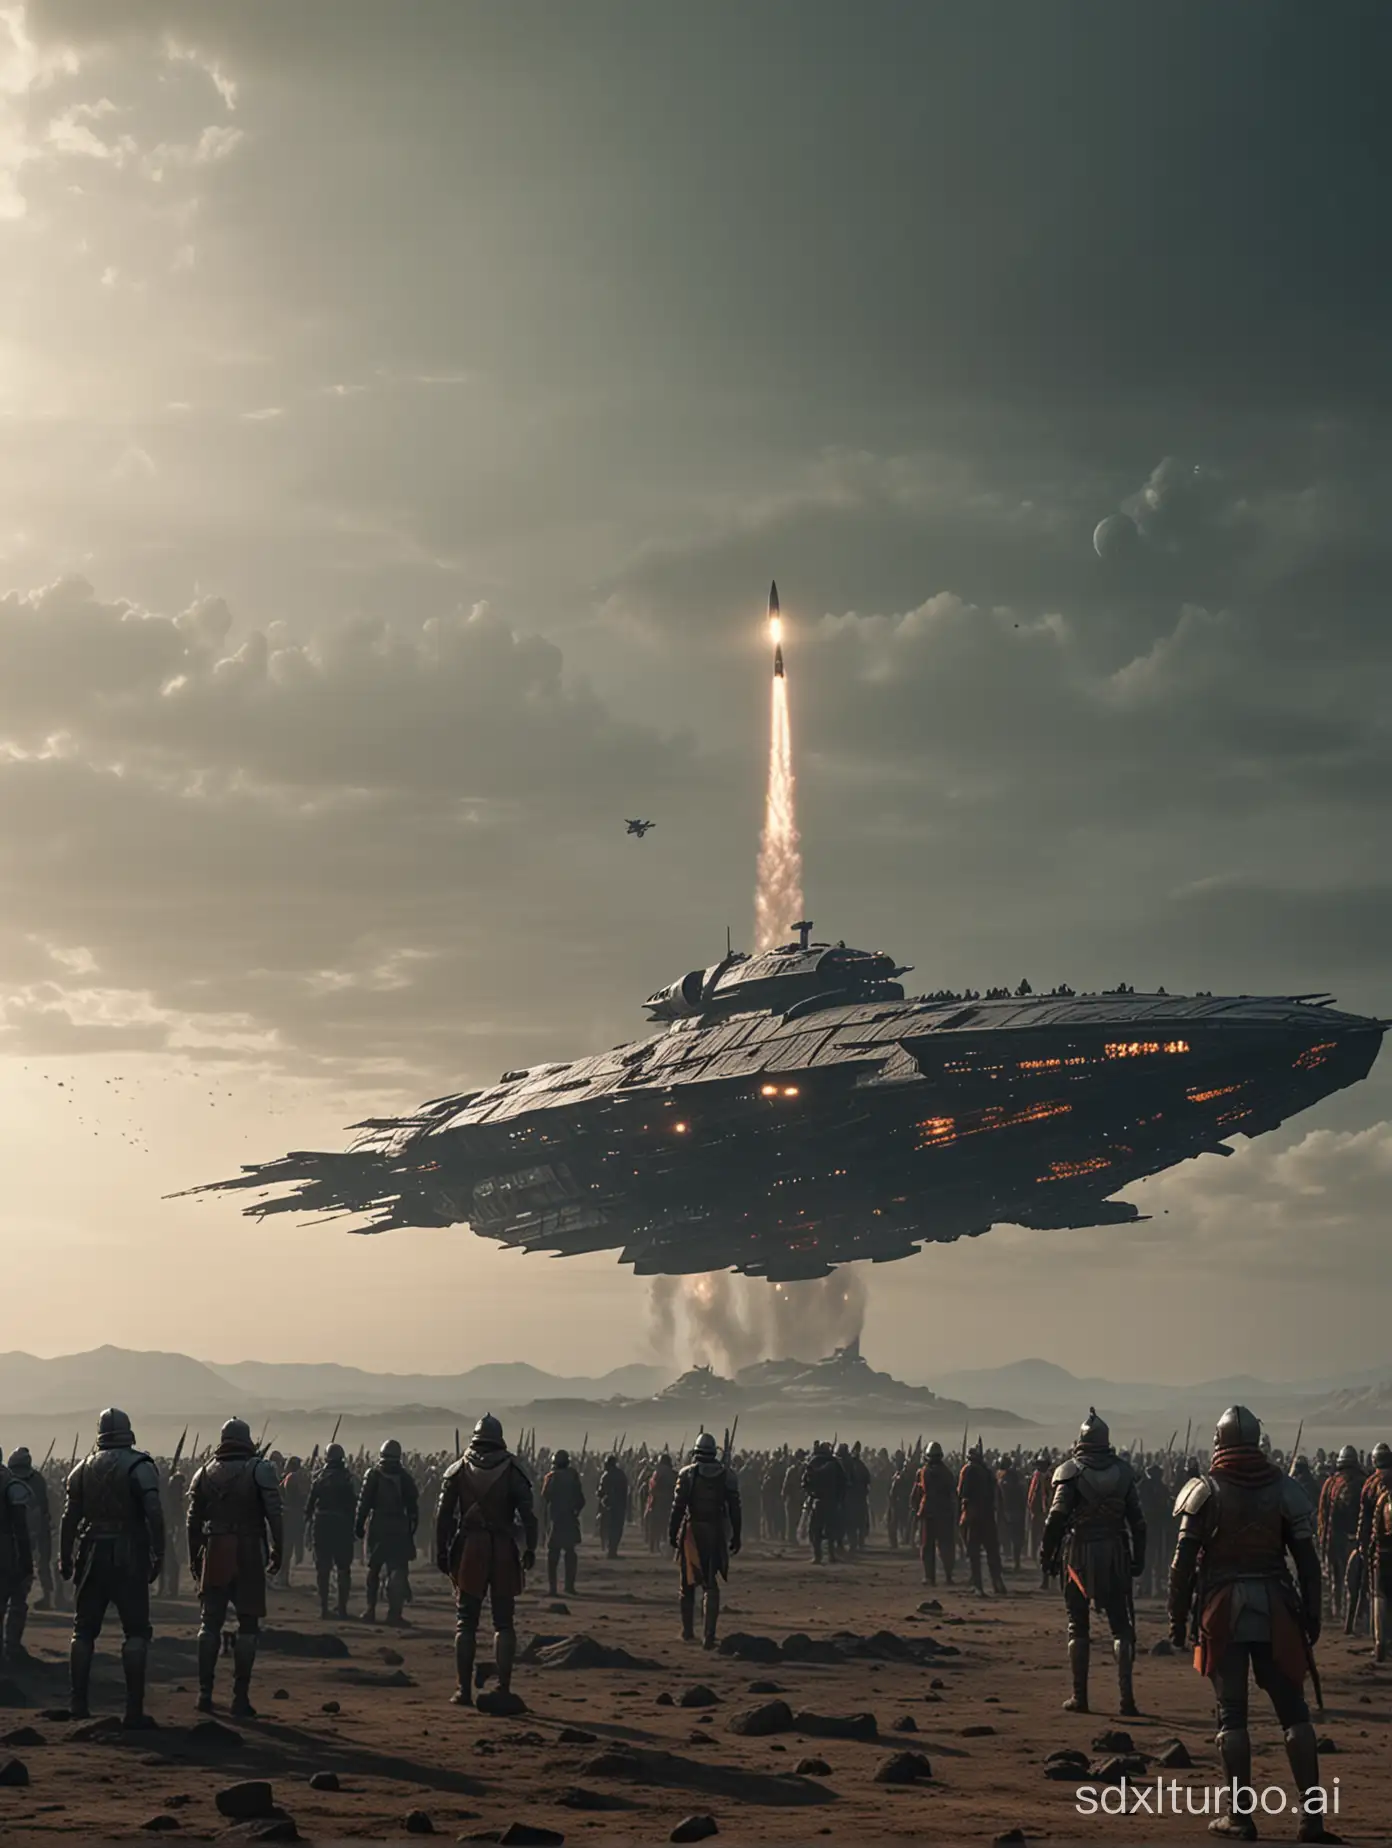 Wide shot of a medieval indian battlefield, Maratha and mughal soldiers facing each other,a huge spaceship that seems to be a blend of Indian culture and futuristic sci fi vehicle approaches downwards from the sky above,cinematic,4K,dark grungy, Directed by Zack Snyder,shot on Arri Alexa.